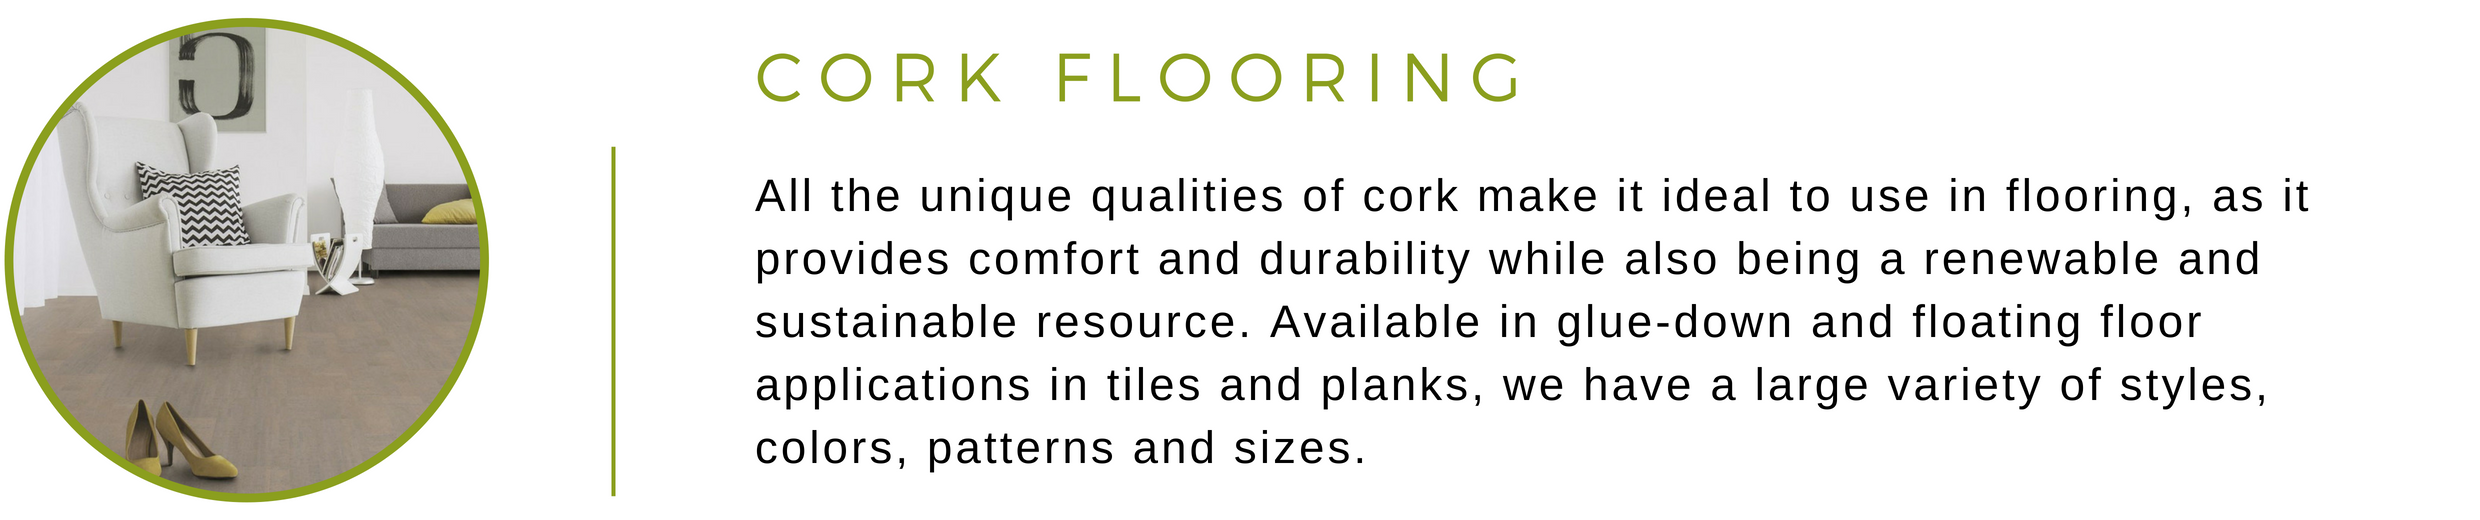 Cork Flooring at Greenhome Solutions | All the unique qualities of cork make it ideal to use in flooring, as it provides comfort and durability while also being a renewable and sustainable resource. Available in glue-down and floating floor applications in tiles and planks, we have a large variety of styles, colors, patterns and sizes.